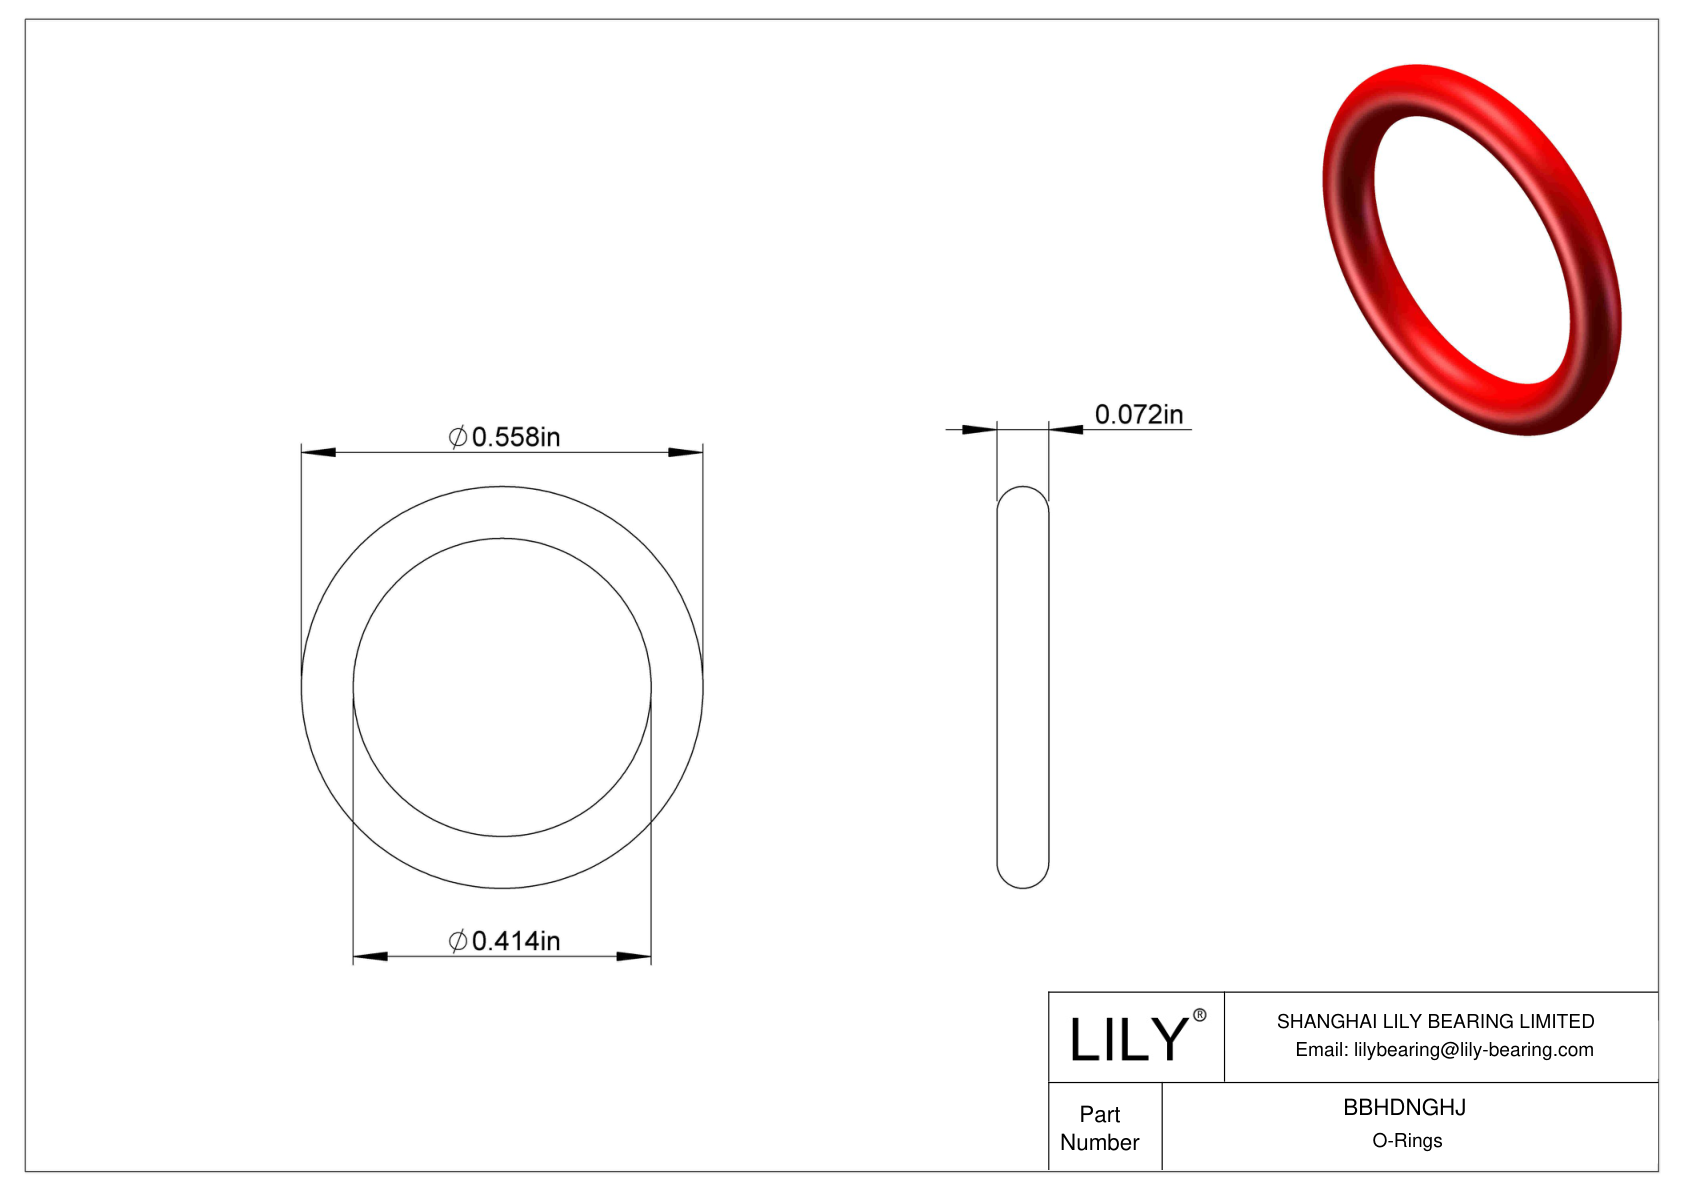 BBHDNGHJ High Temperature O-Rings Round cad drawing